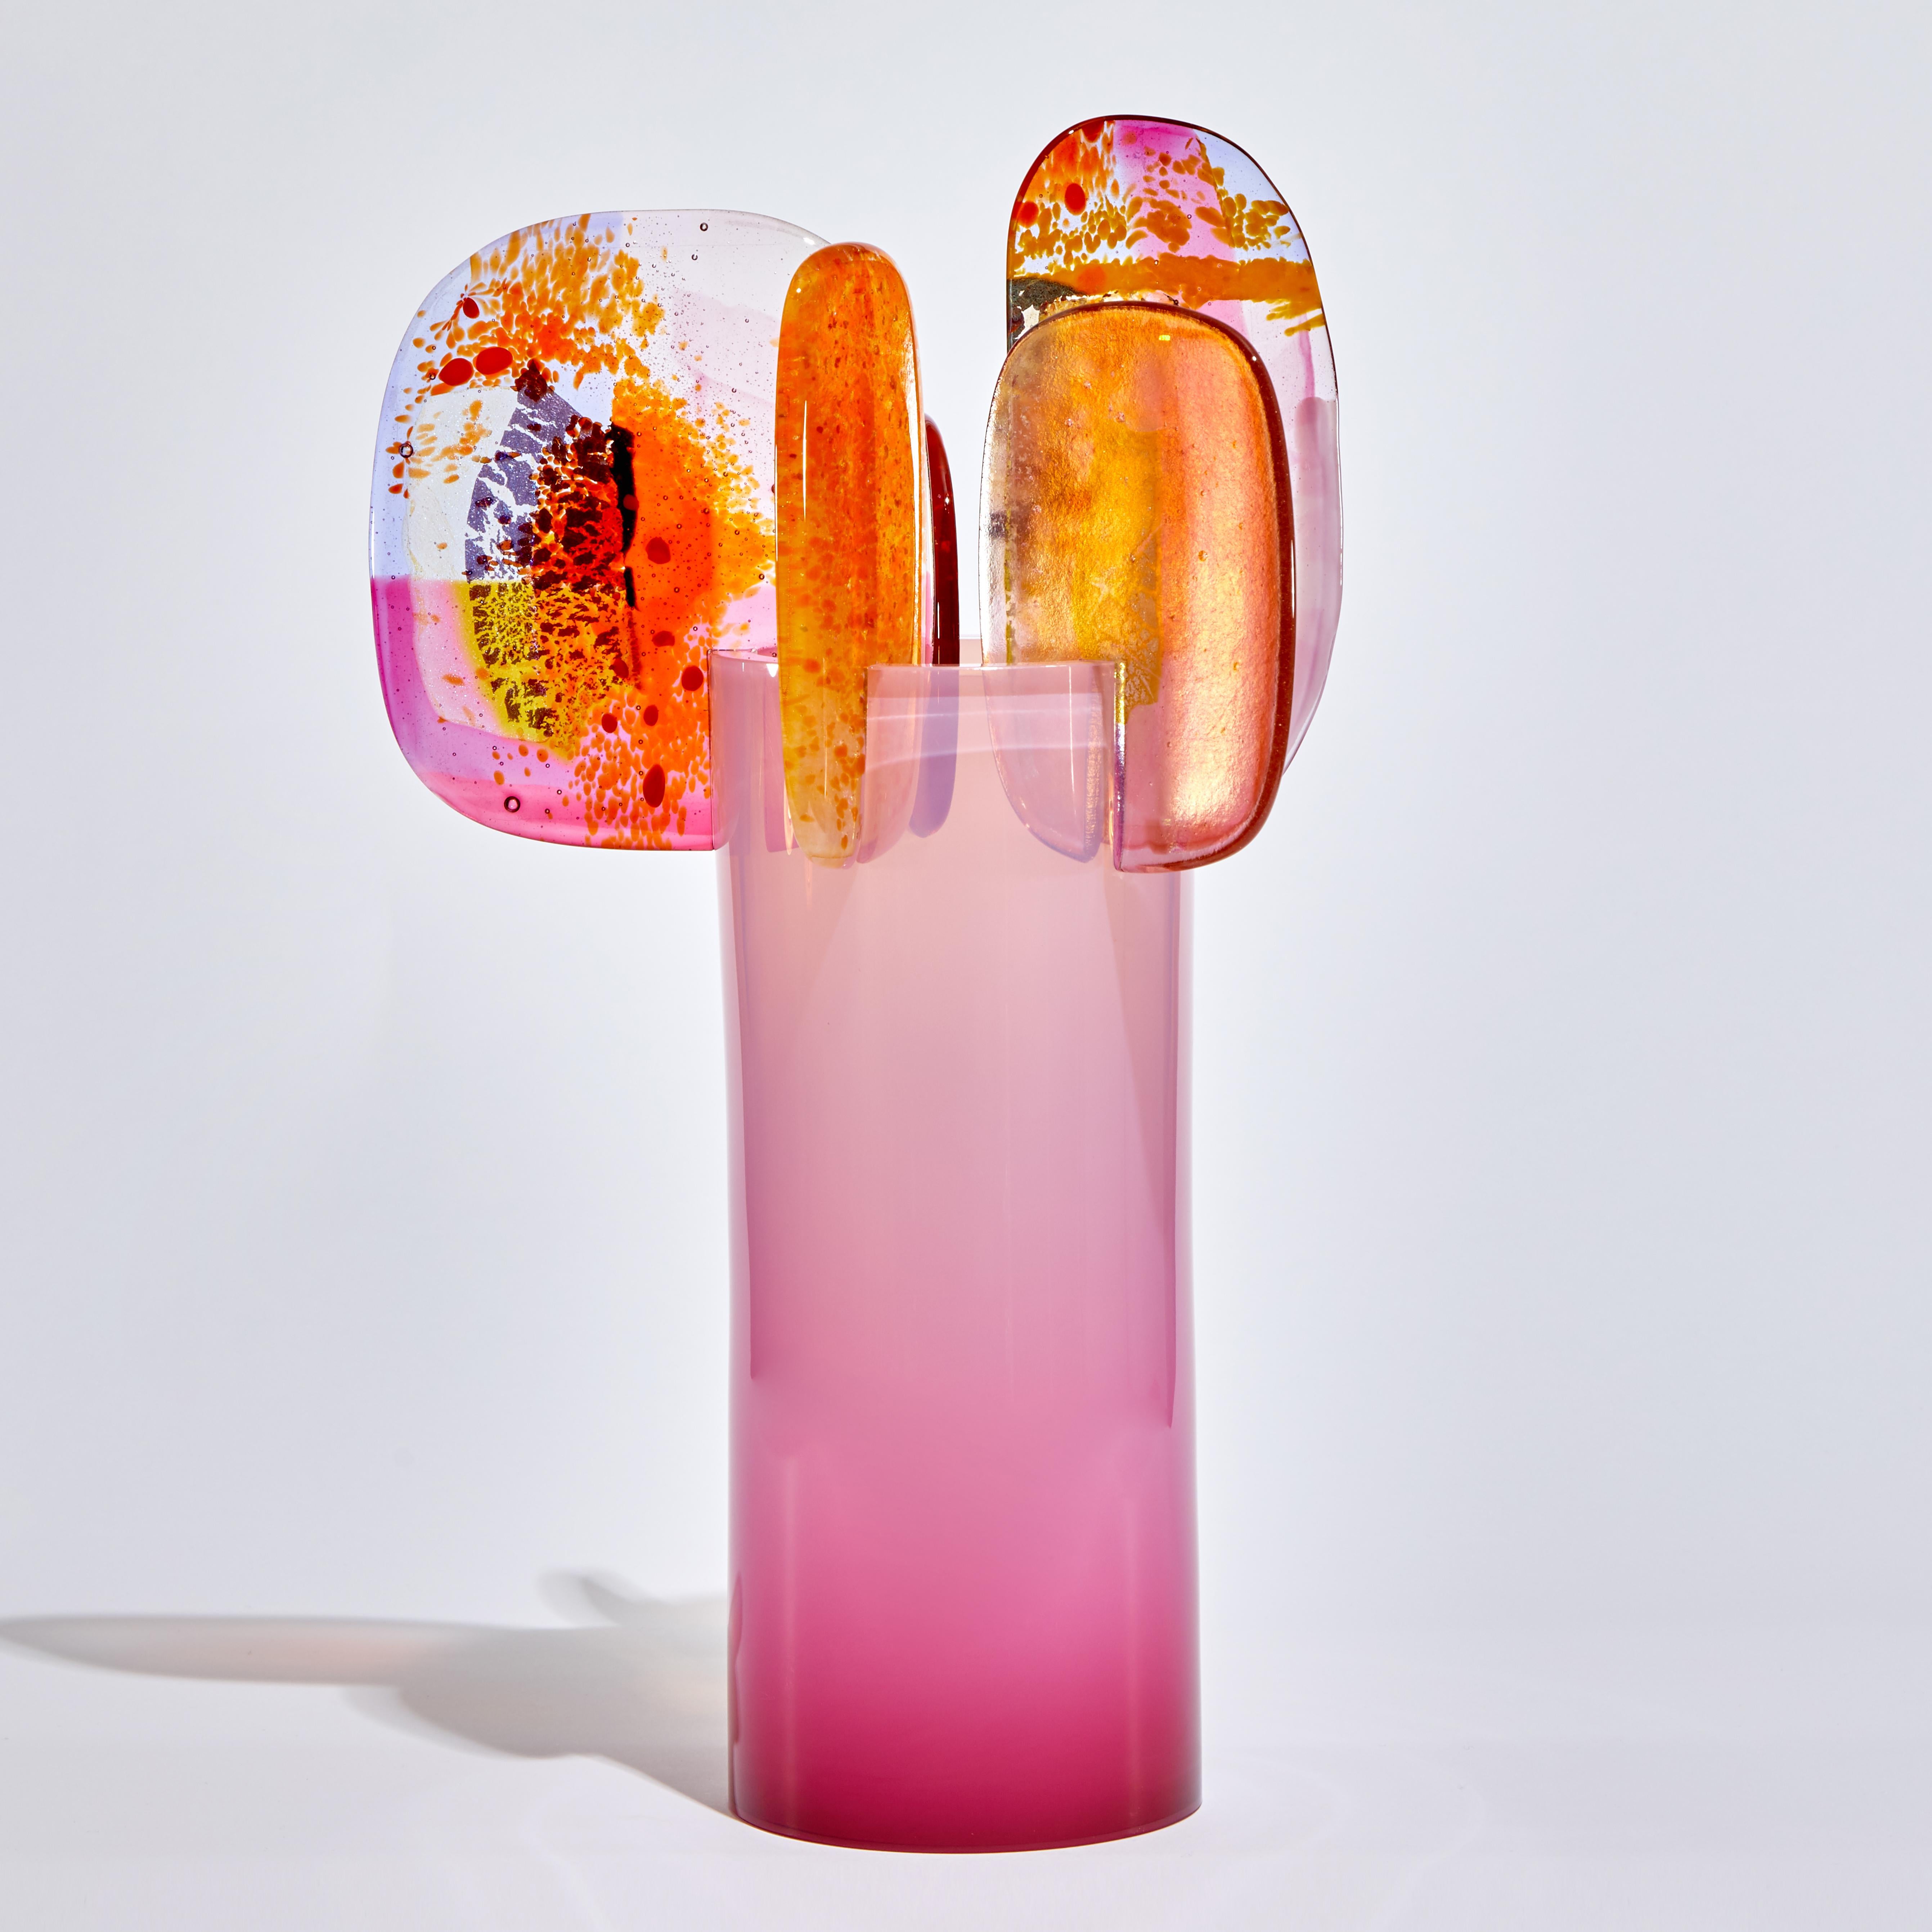 'Paradise 01 in Pink' is a unique glass sculpture created using hybrid hand-made glass techniques by the British artist Amy Cushing. Combining mouth blown glass with kiln formed glass, each piece within the collection displays a multiple of highly